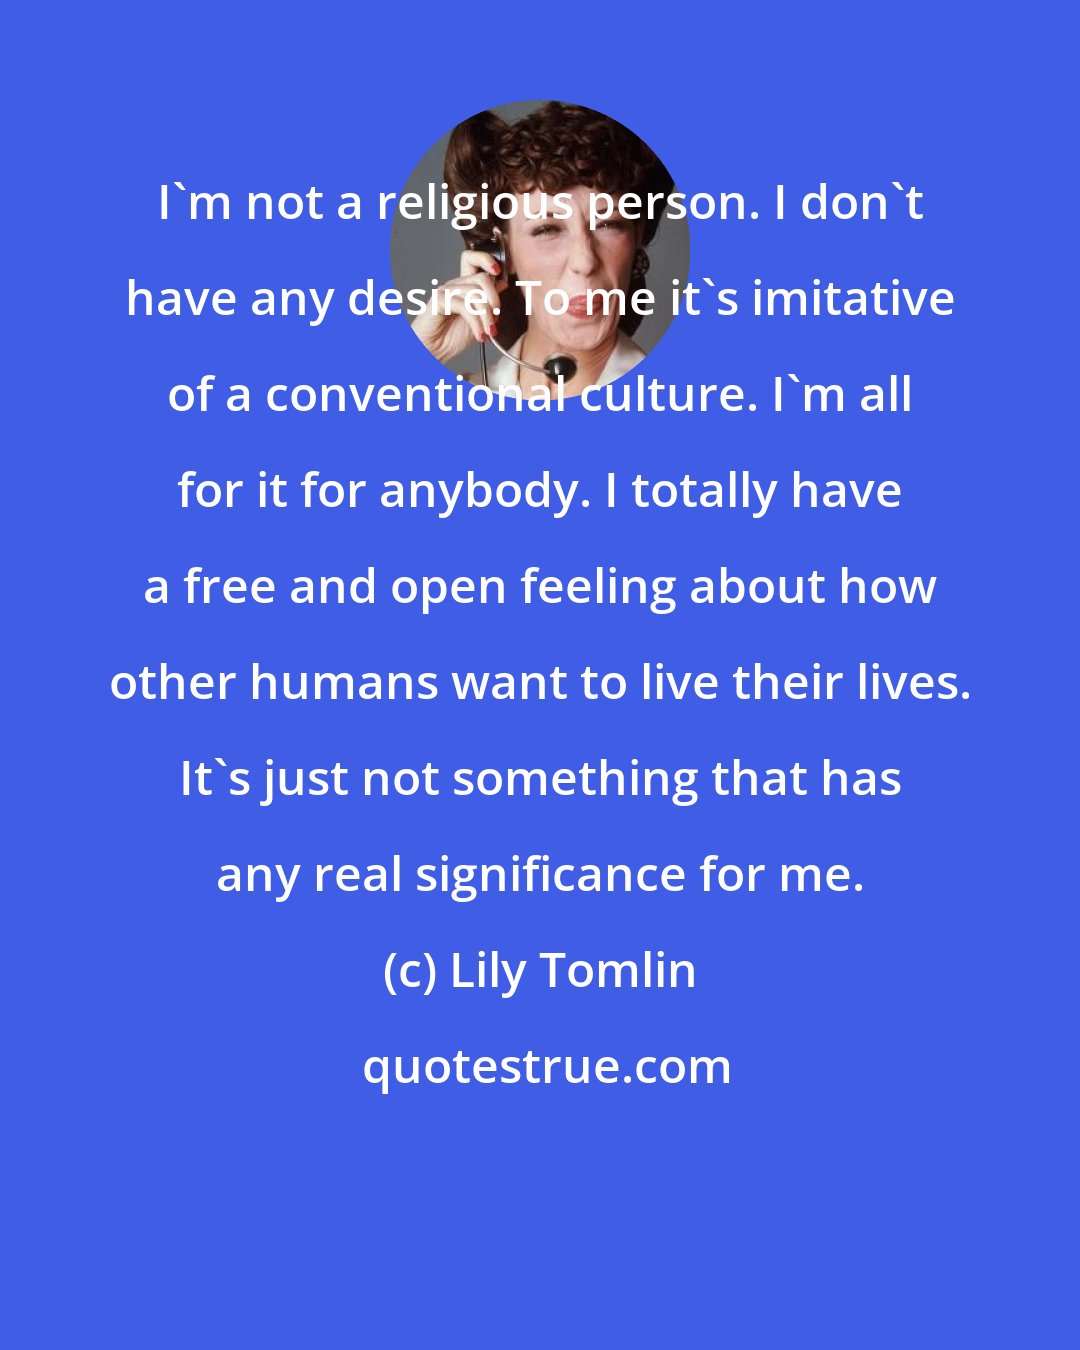 Lily Tomlin: I'm not a religious person. I don't have any desire. To me it's imitative of a conventional culture. I'm all for it for anybody. I totally have a free and open feeling about how other humans want to live their lives. It's just not something that has any real significance for me.